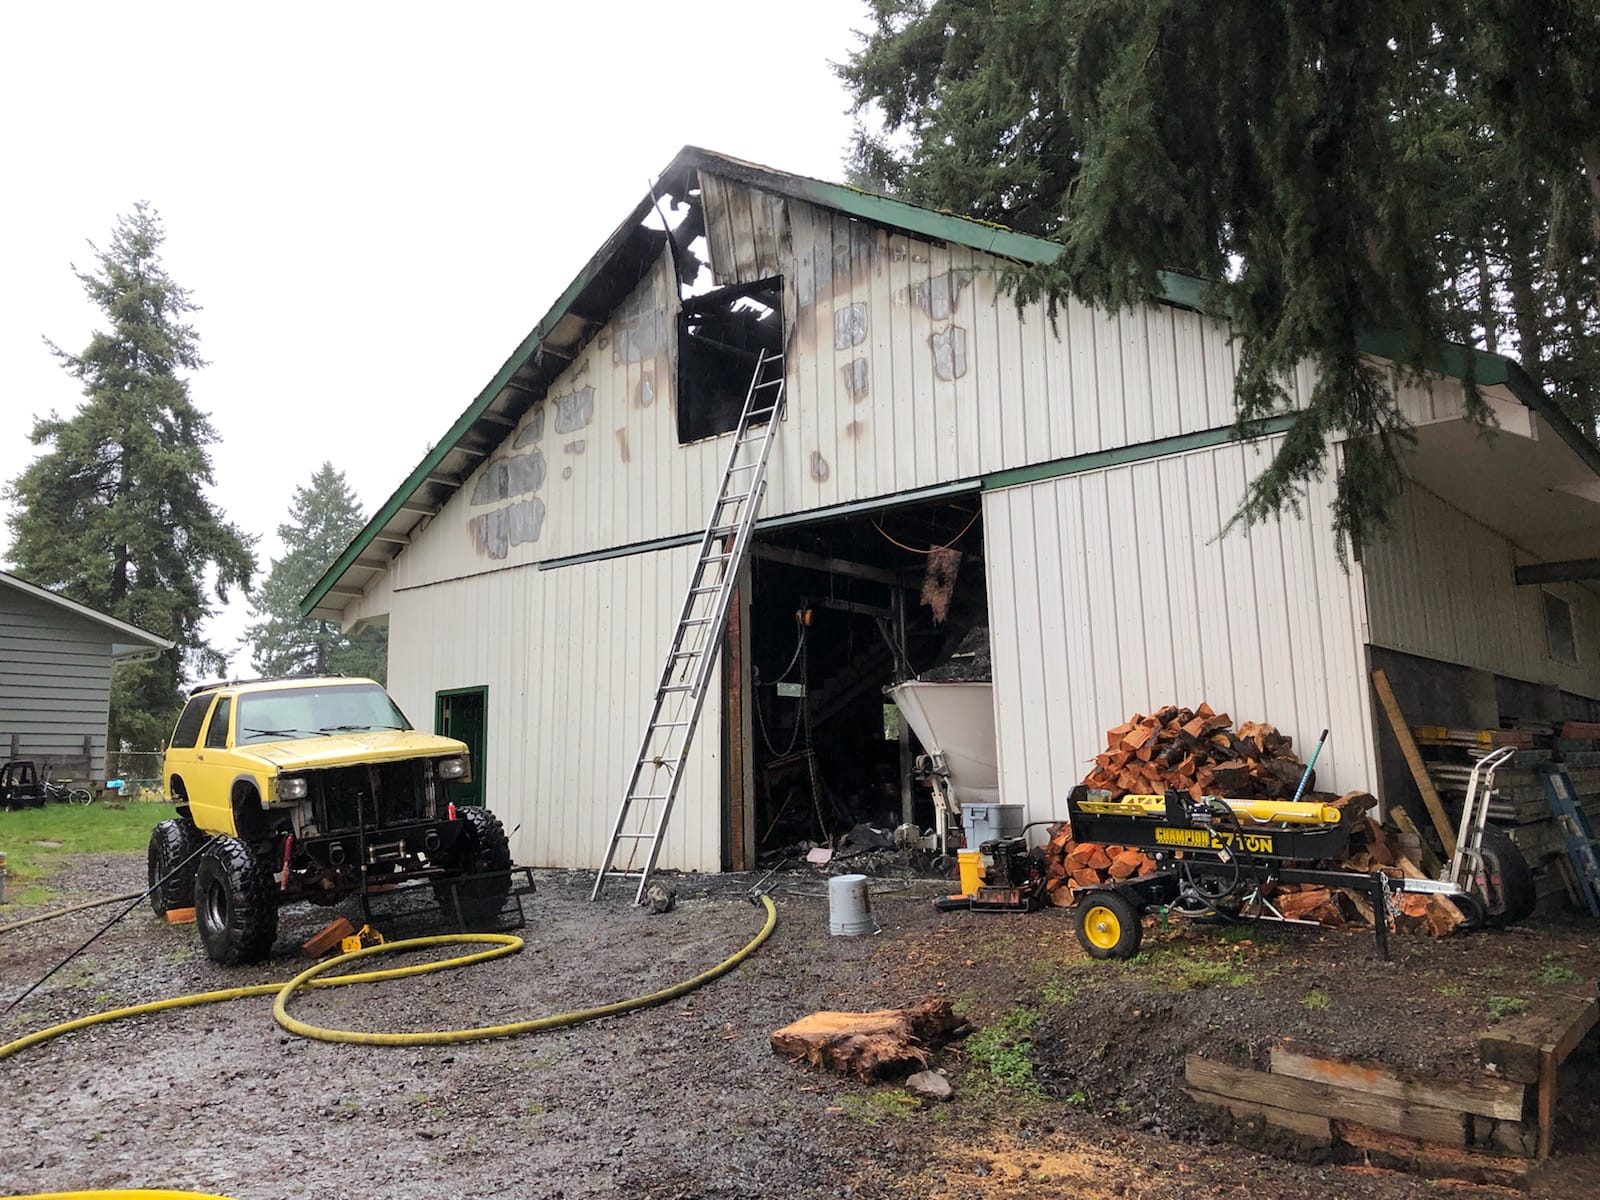 Vancouver Fire Department crews and other agencies responded to a shop fire Friday morning in the Barberton area. There were no injuries.